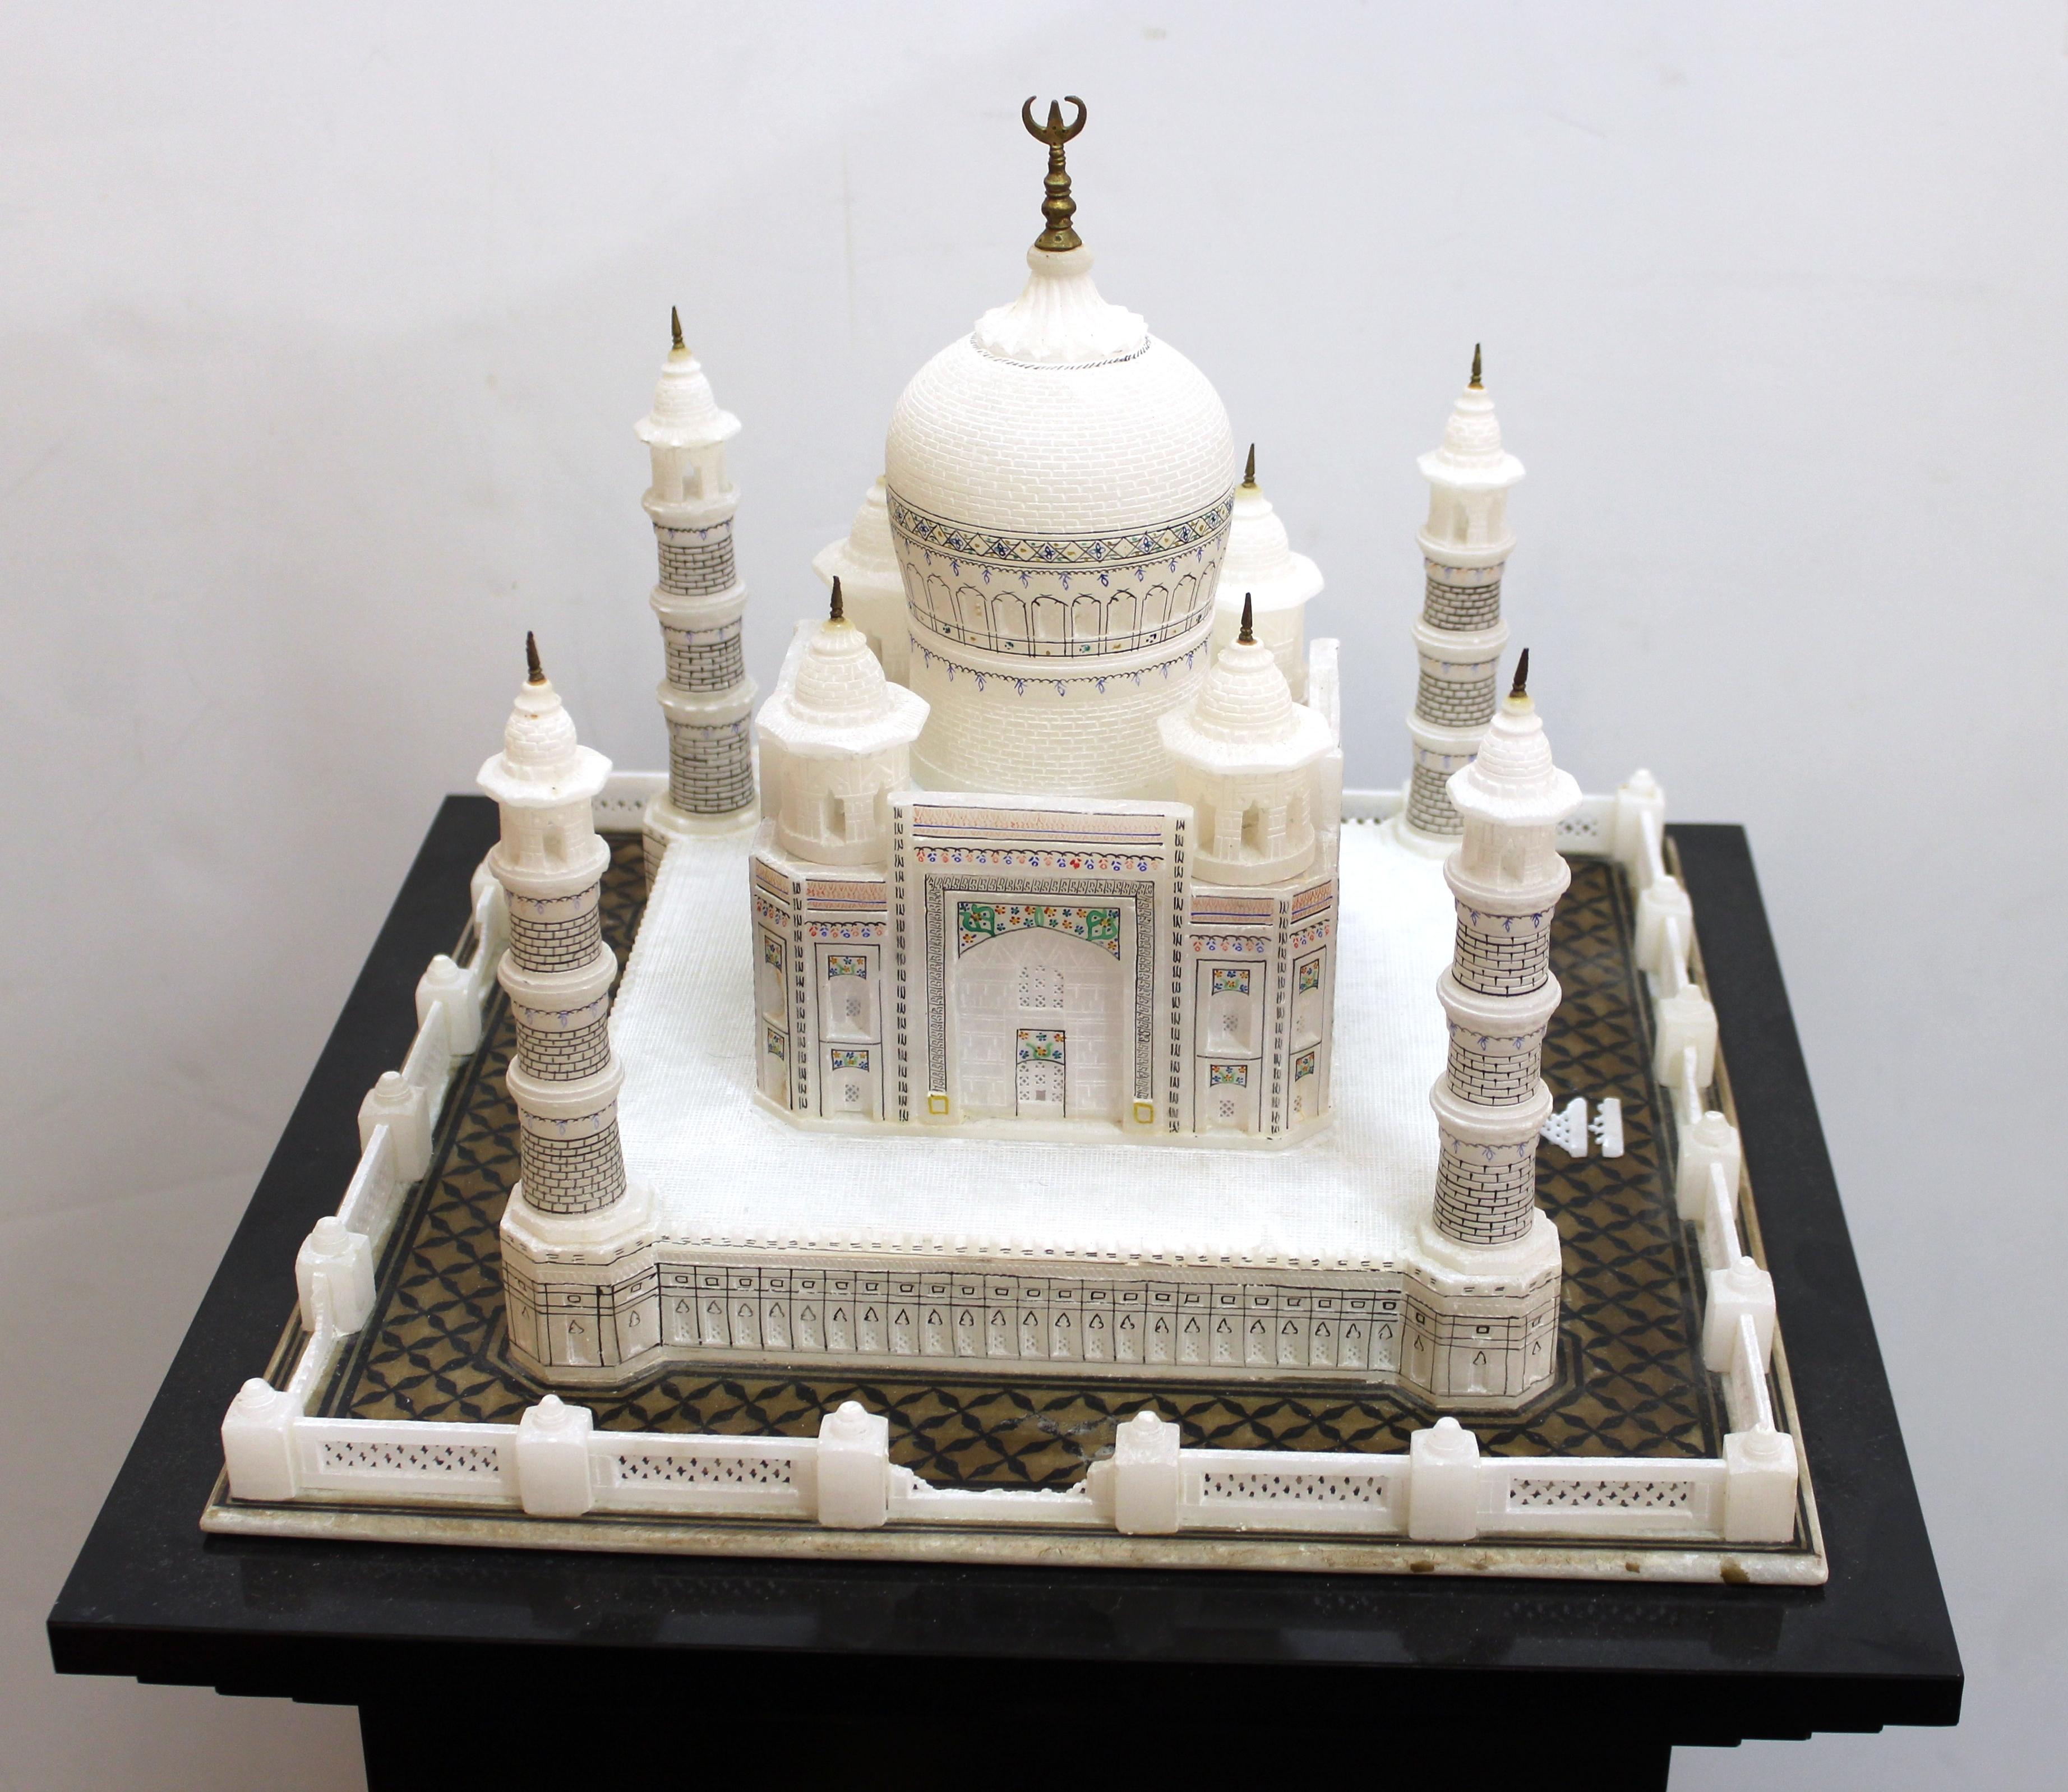 Indian hand-carved and hand-painted architectural scale model of the Taj Mahal, on black composite pedestal. The model is finely detailed and has delicate brass finials on top of the domes. Measures: The model itself is 11